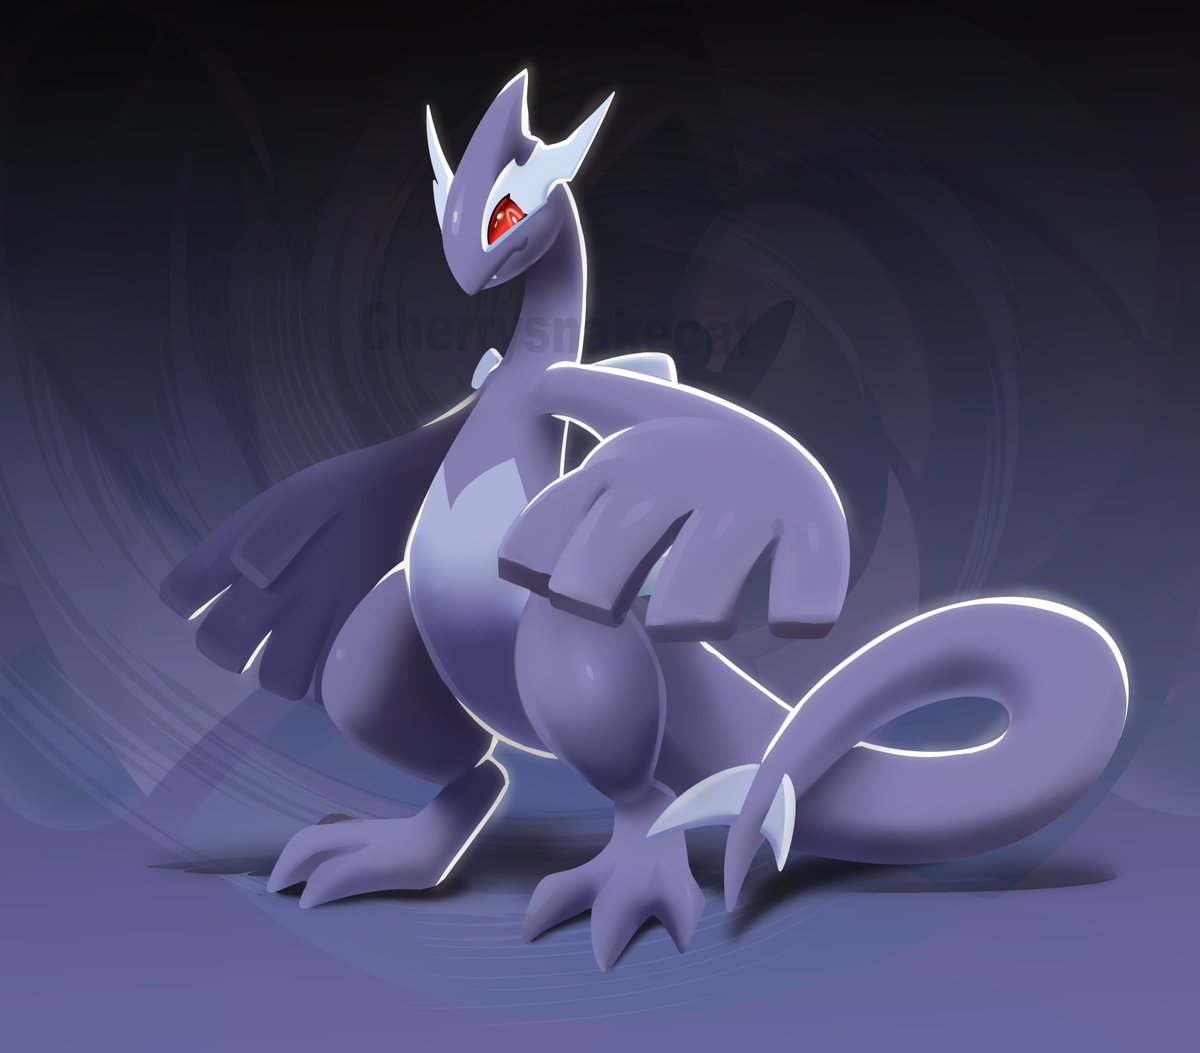 Shadow Lugia fans rise up! 